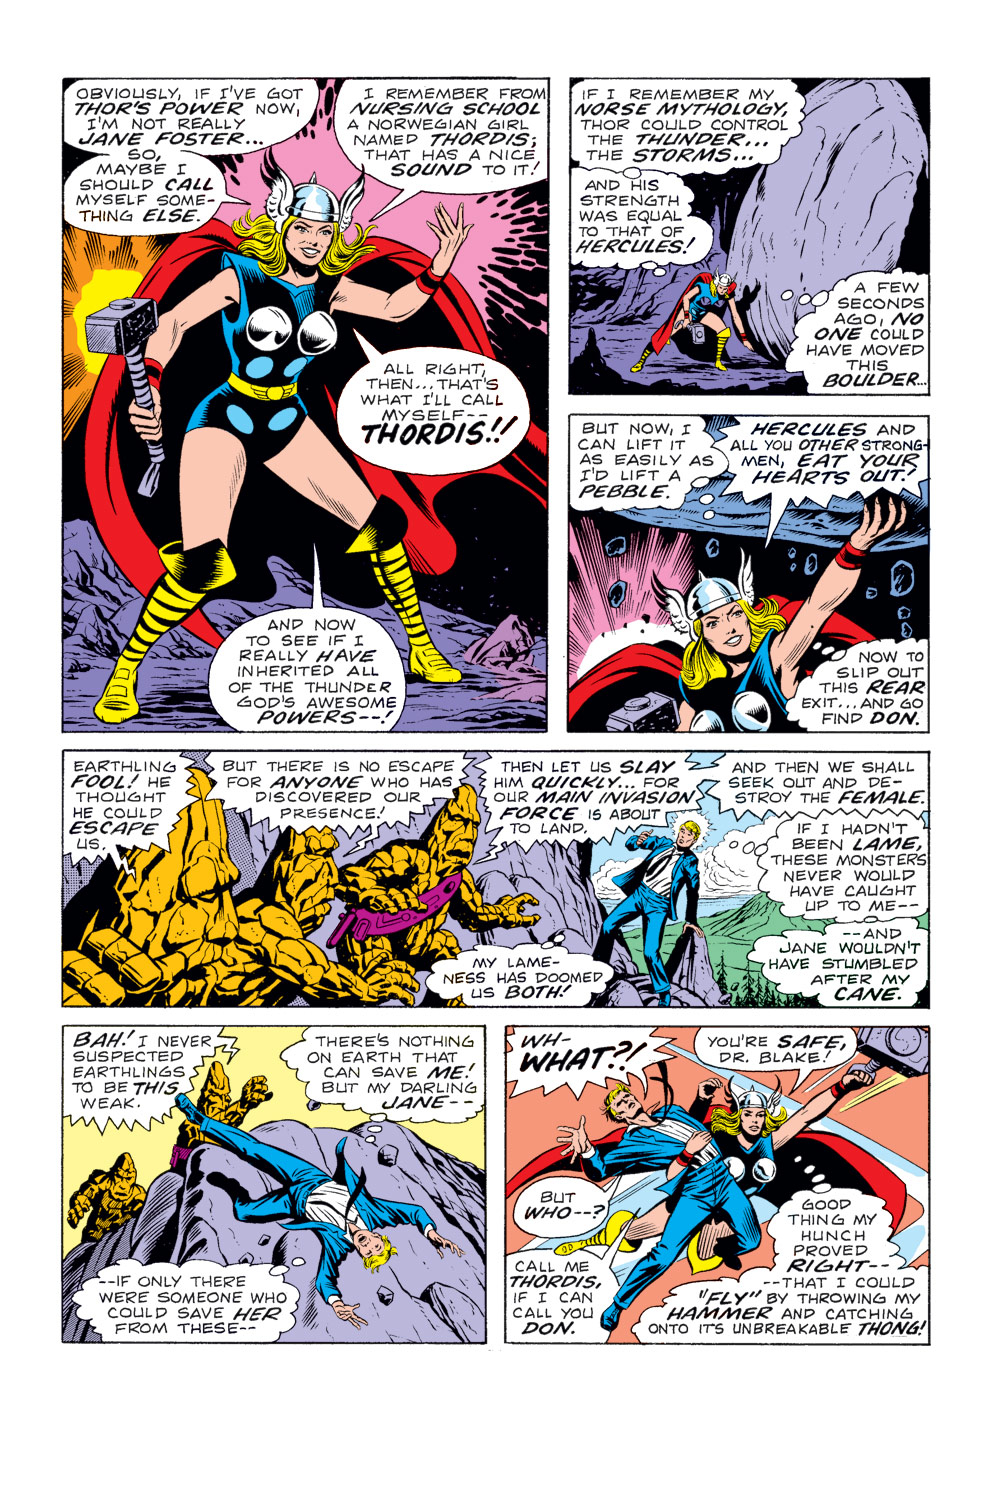 What If? (1977) issue 10 - Jane Foster had found the hammer of Thor - Page 10